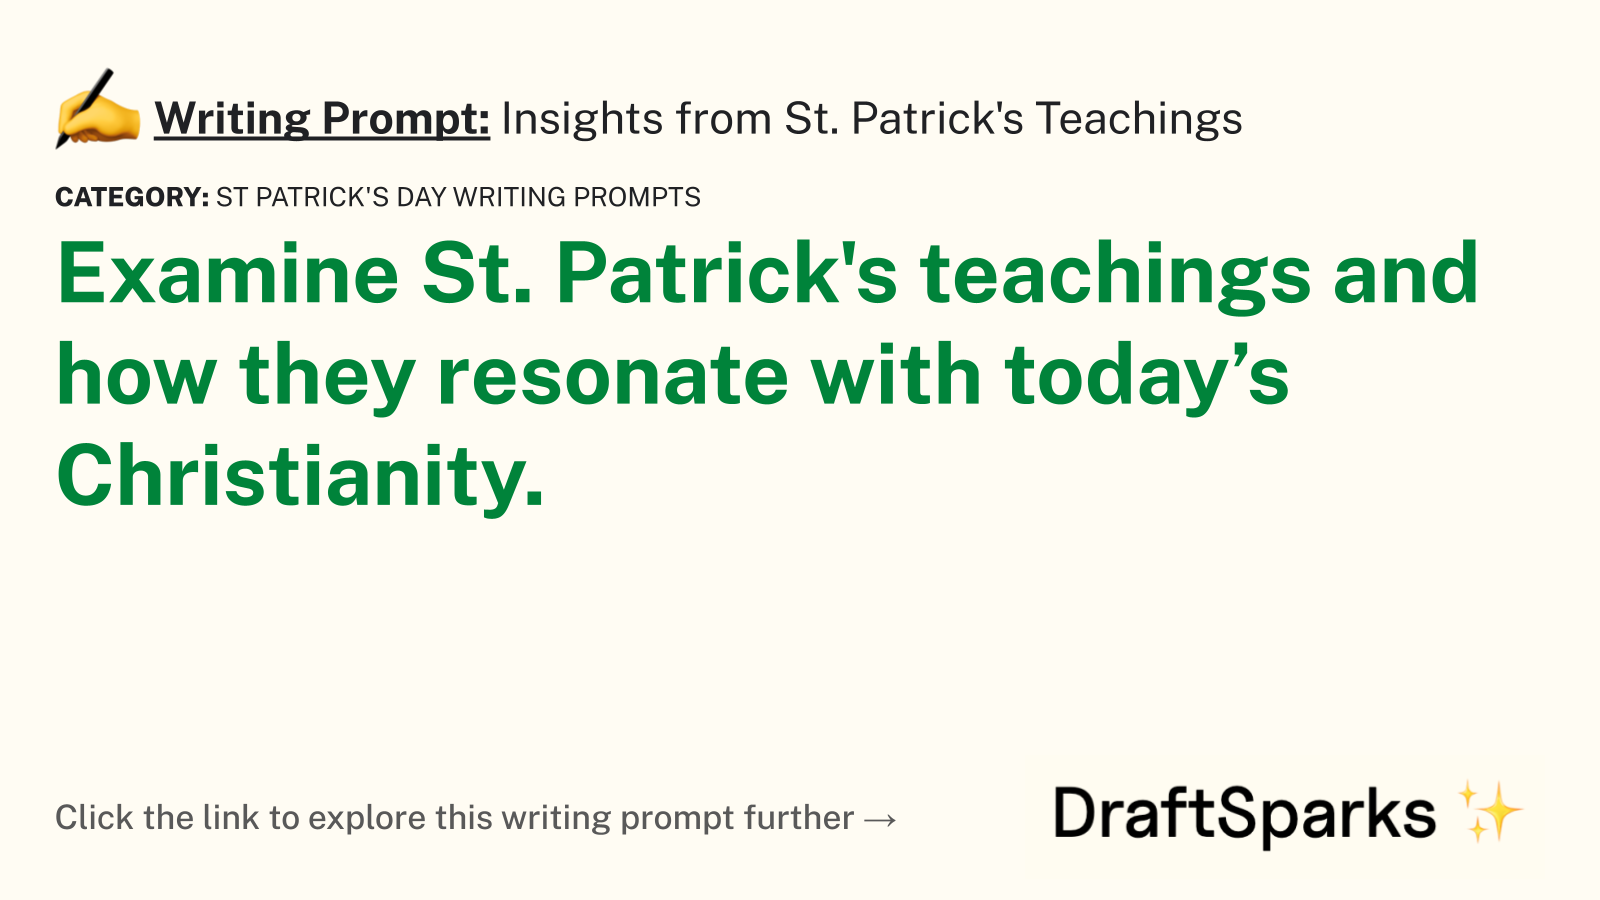 Insights from St. Patrick’s Teachings